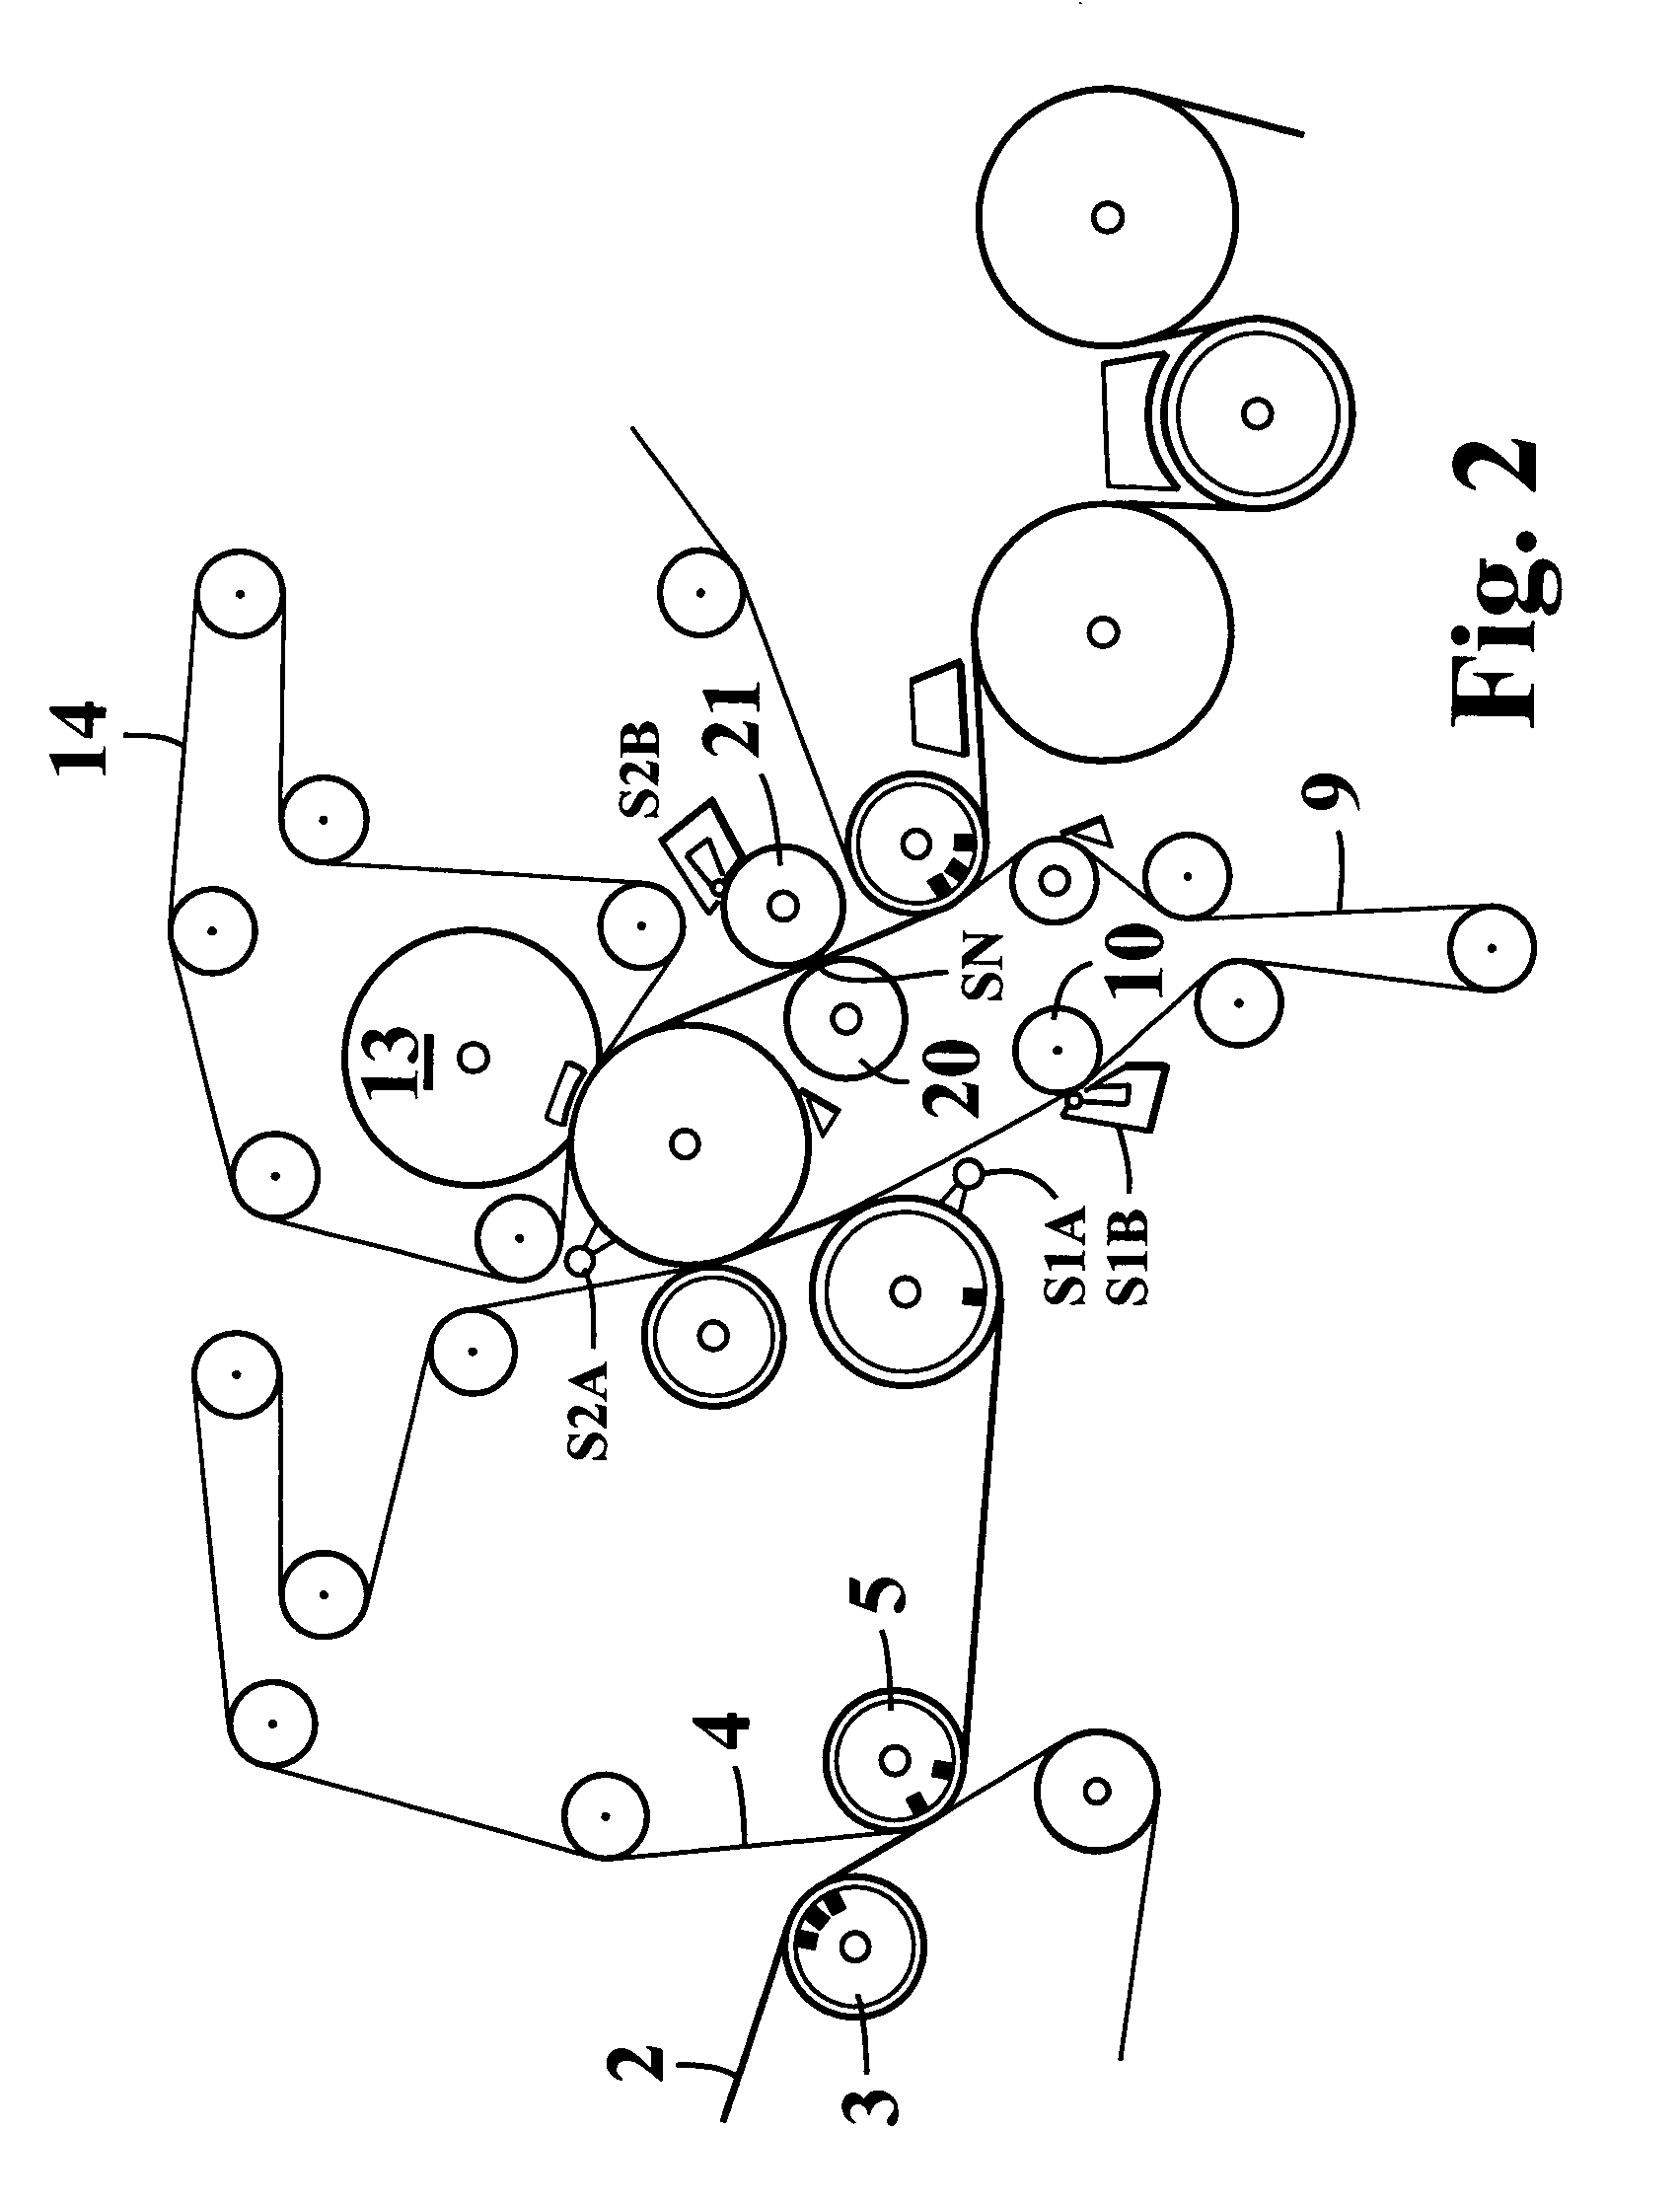 Method and apparatus for handling a paper or board web